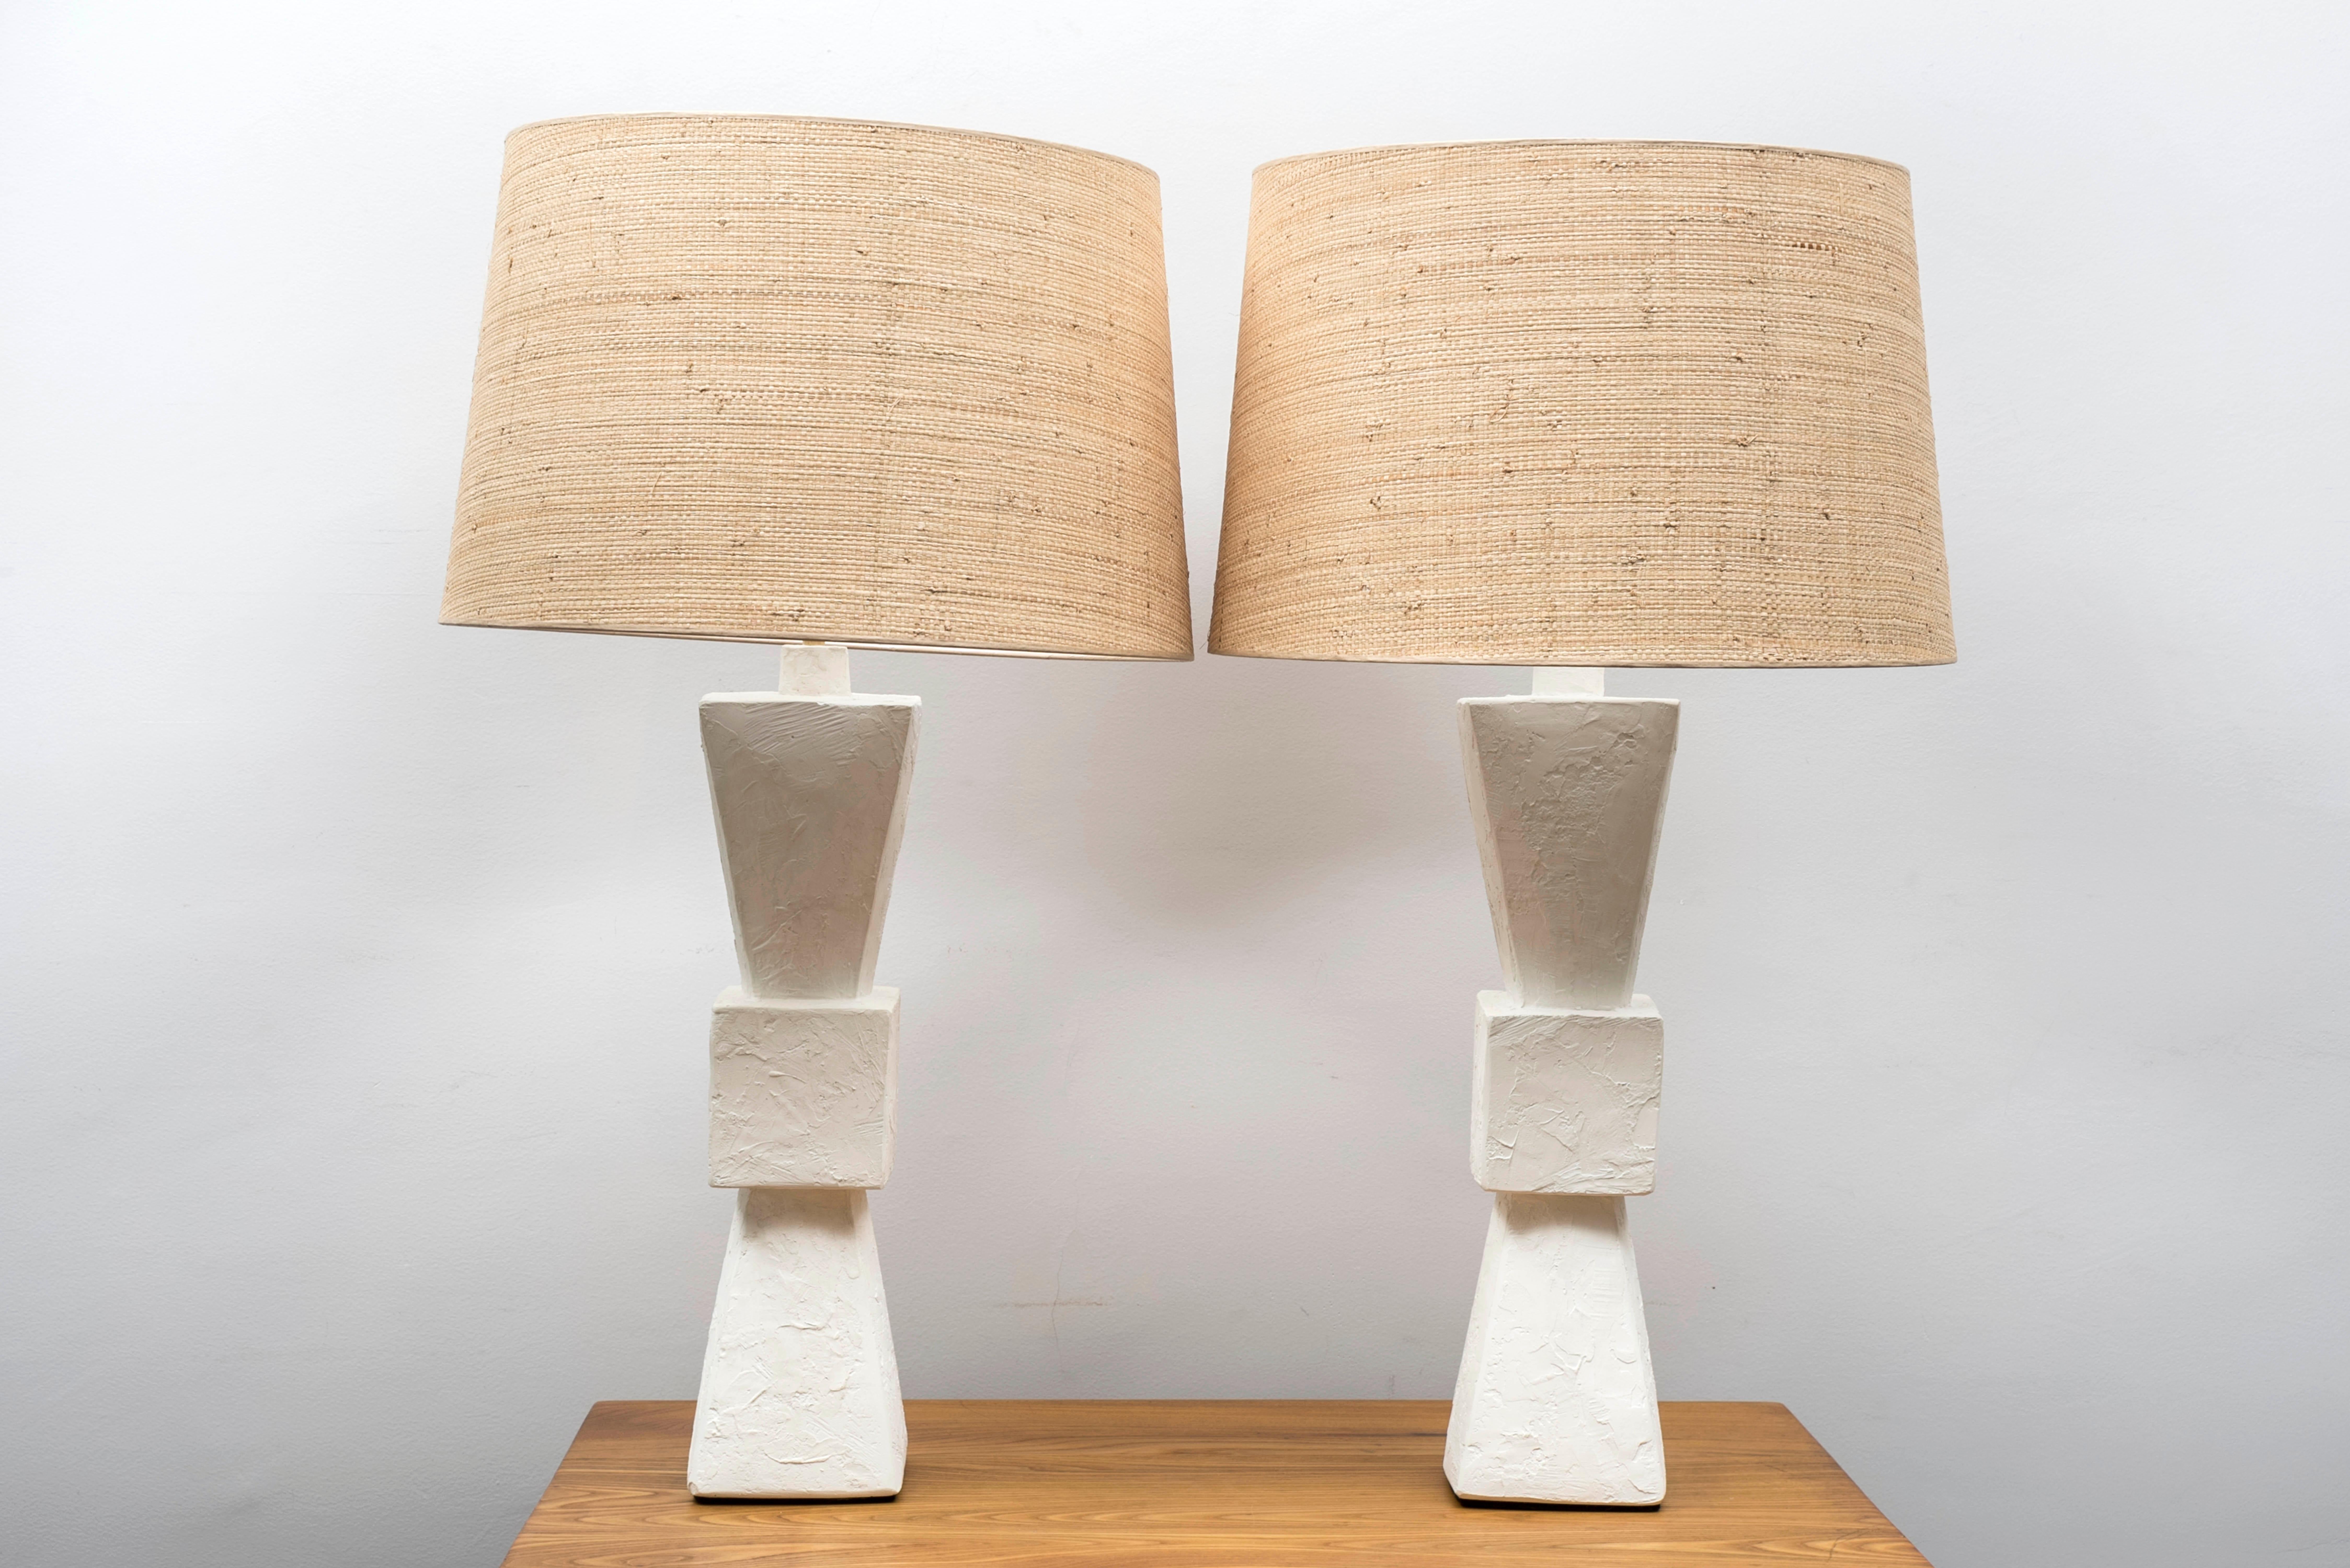 Pair of plaster lamps, baluster shape.
With costumed made shades in vegetal fiber.
France, contemporary creation

Measures: Total height 81 cm - 31.9 inches
Plaster base heigh (including collar) 52 cm - 20.5 inches
Diameter (shade) 47 cm -